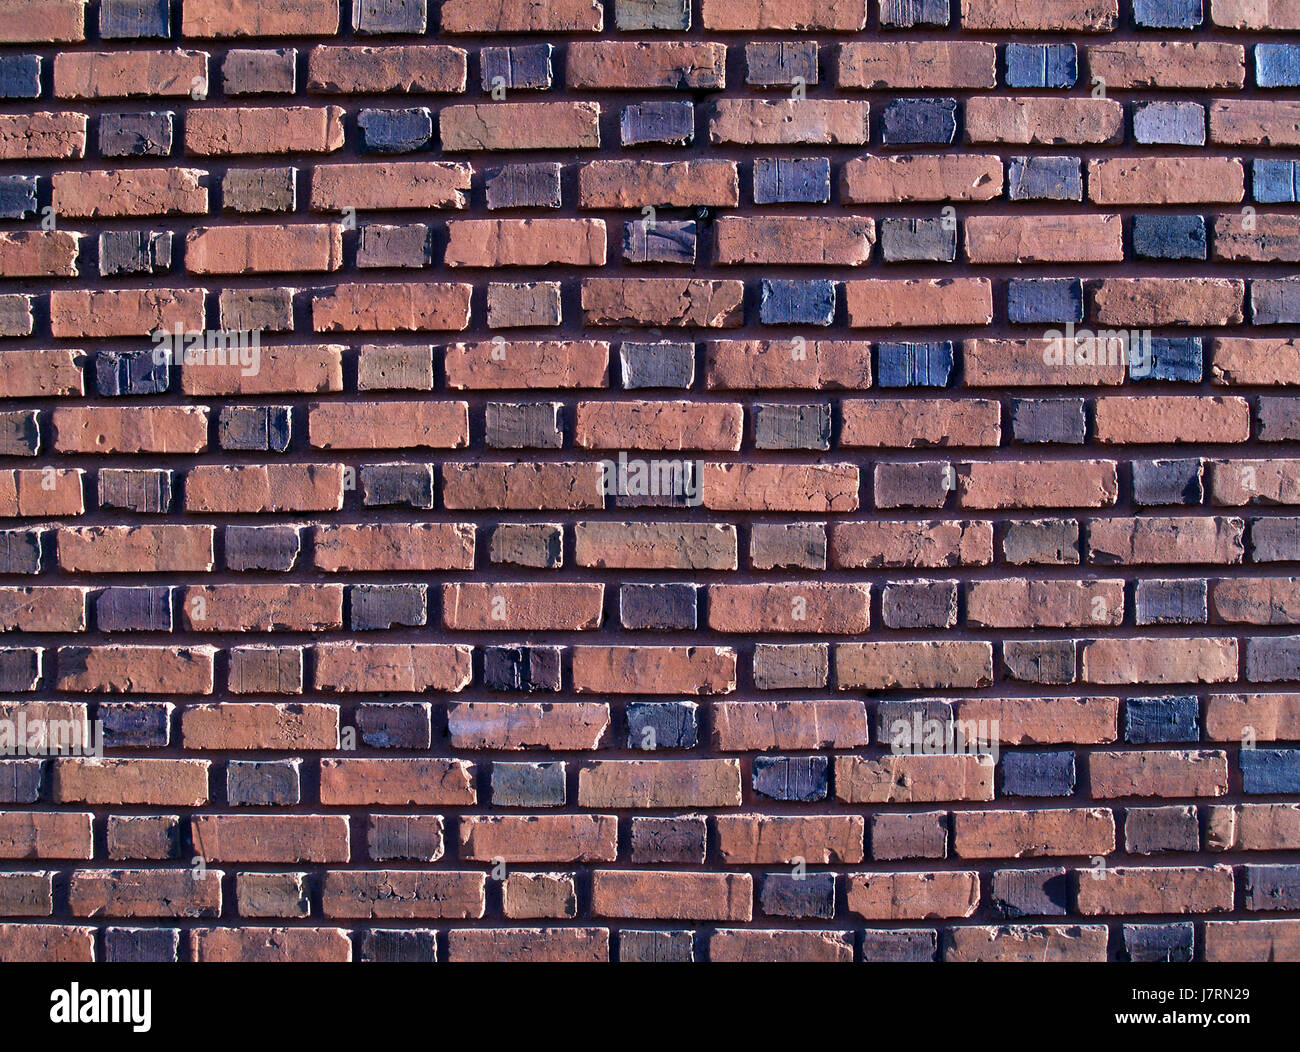 brown brownish brunette brick style of construction architecture architectural Stock Photo